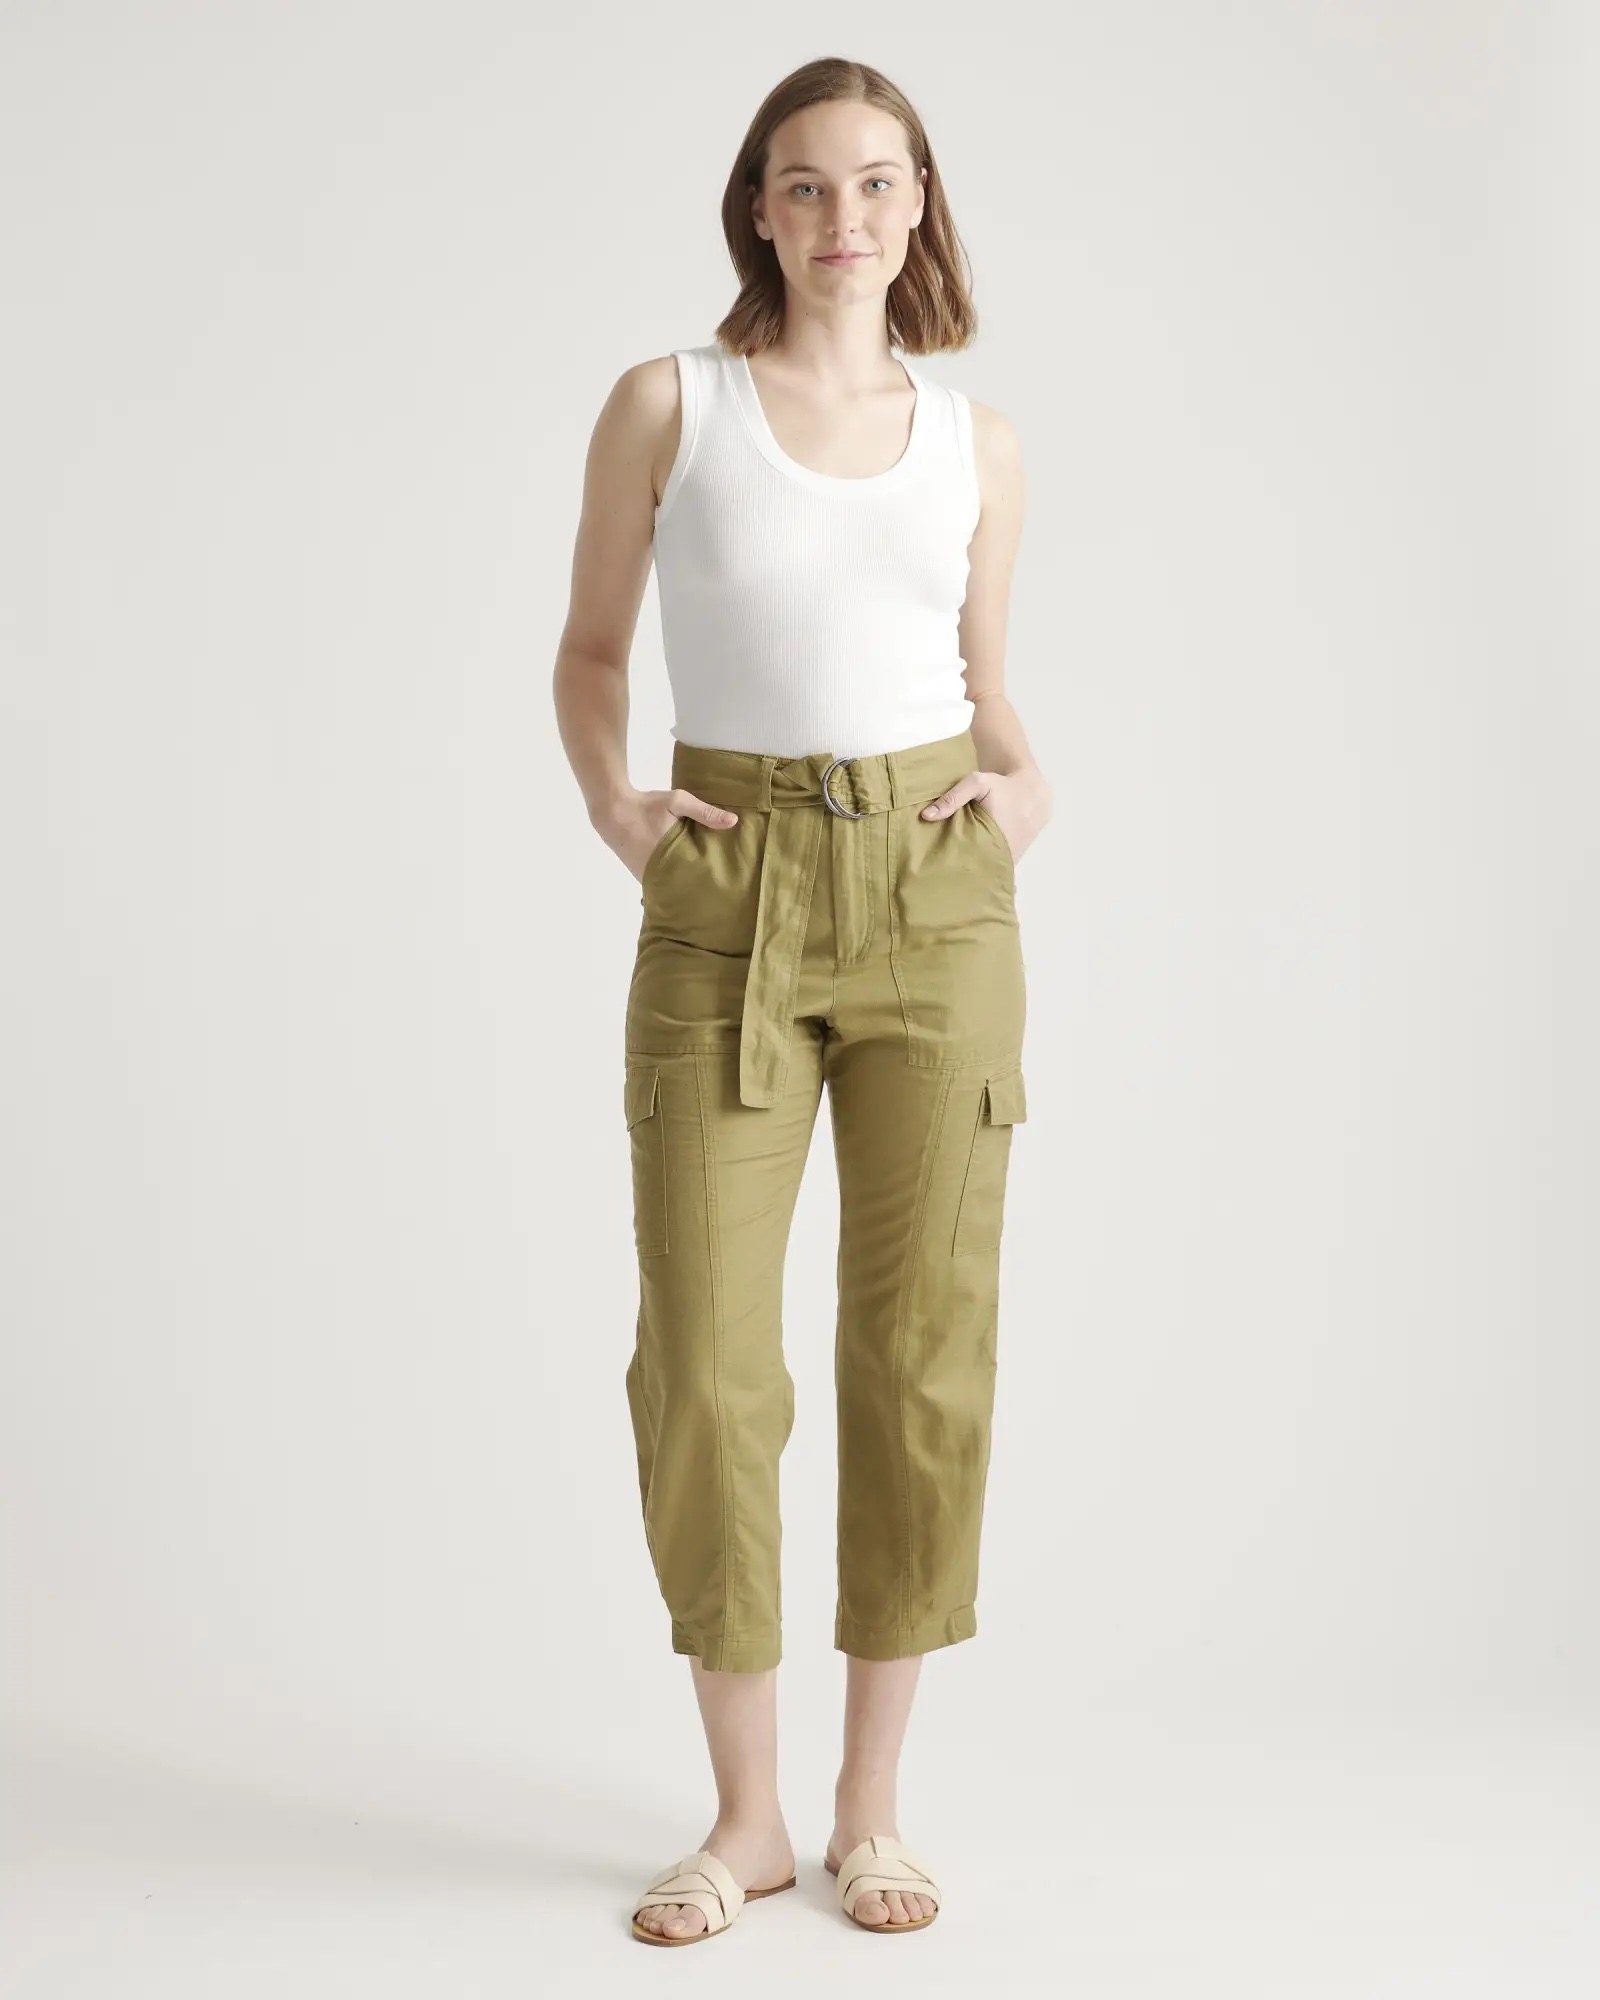 How To Embrace Slouchy Pants For Summer Weather